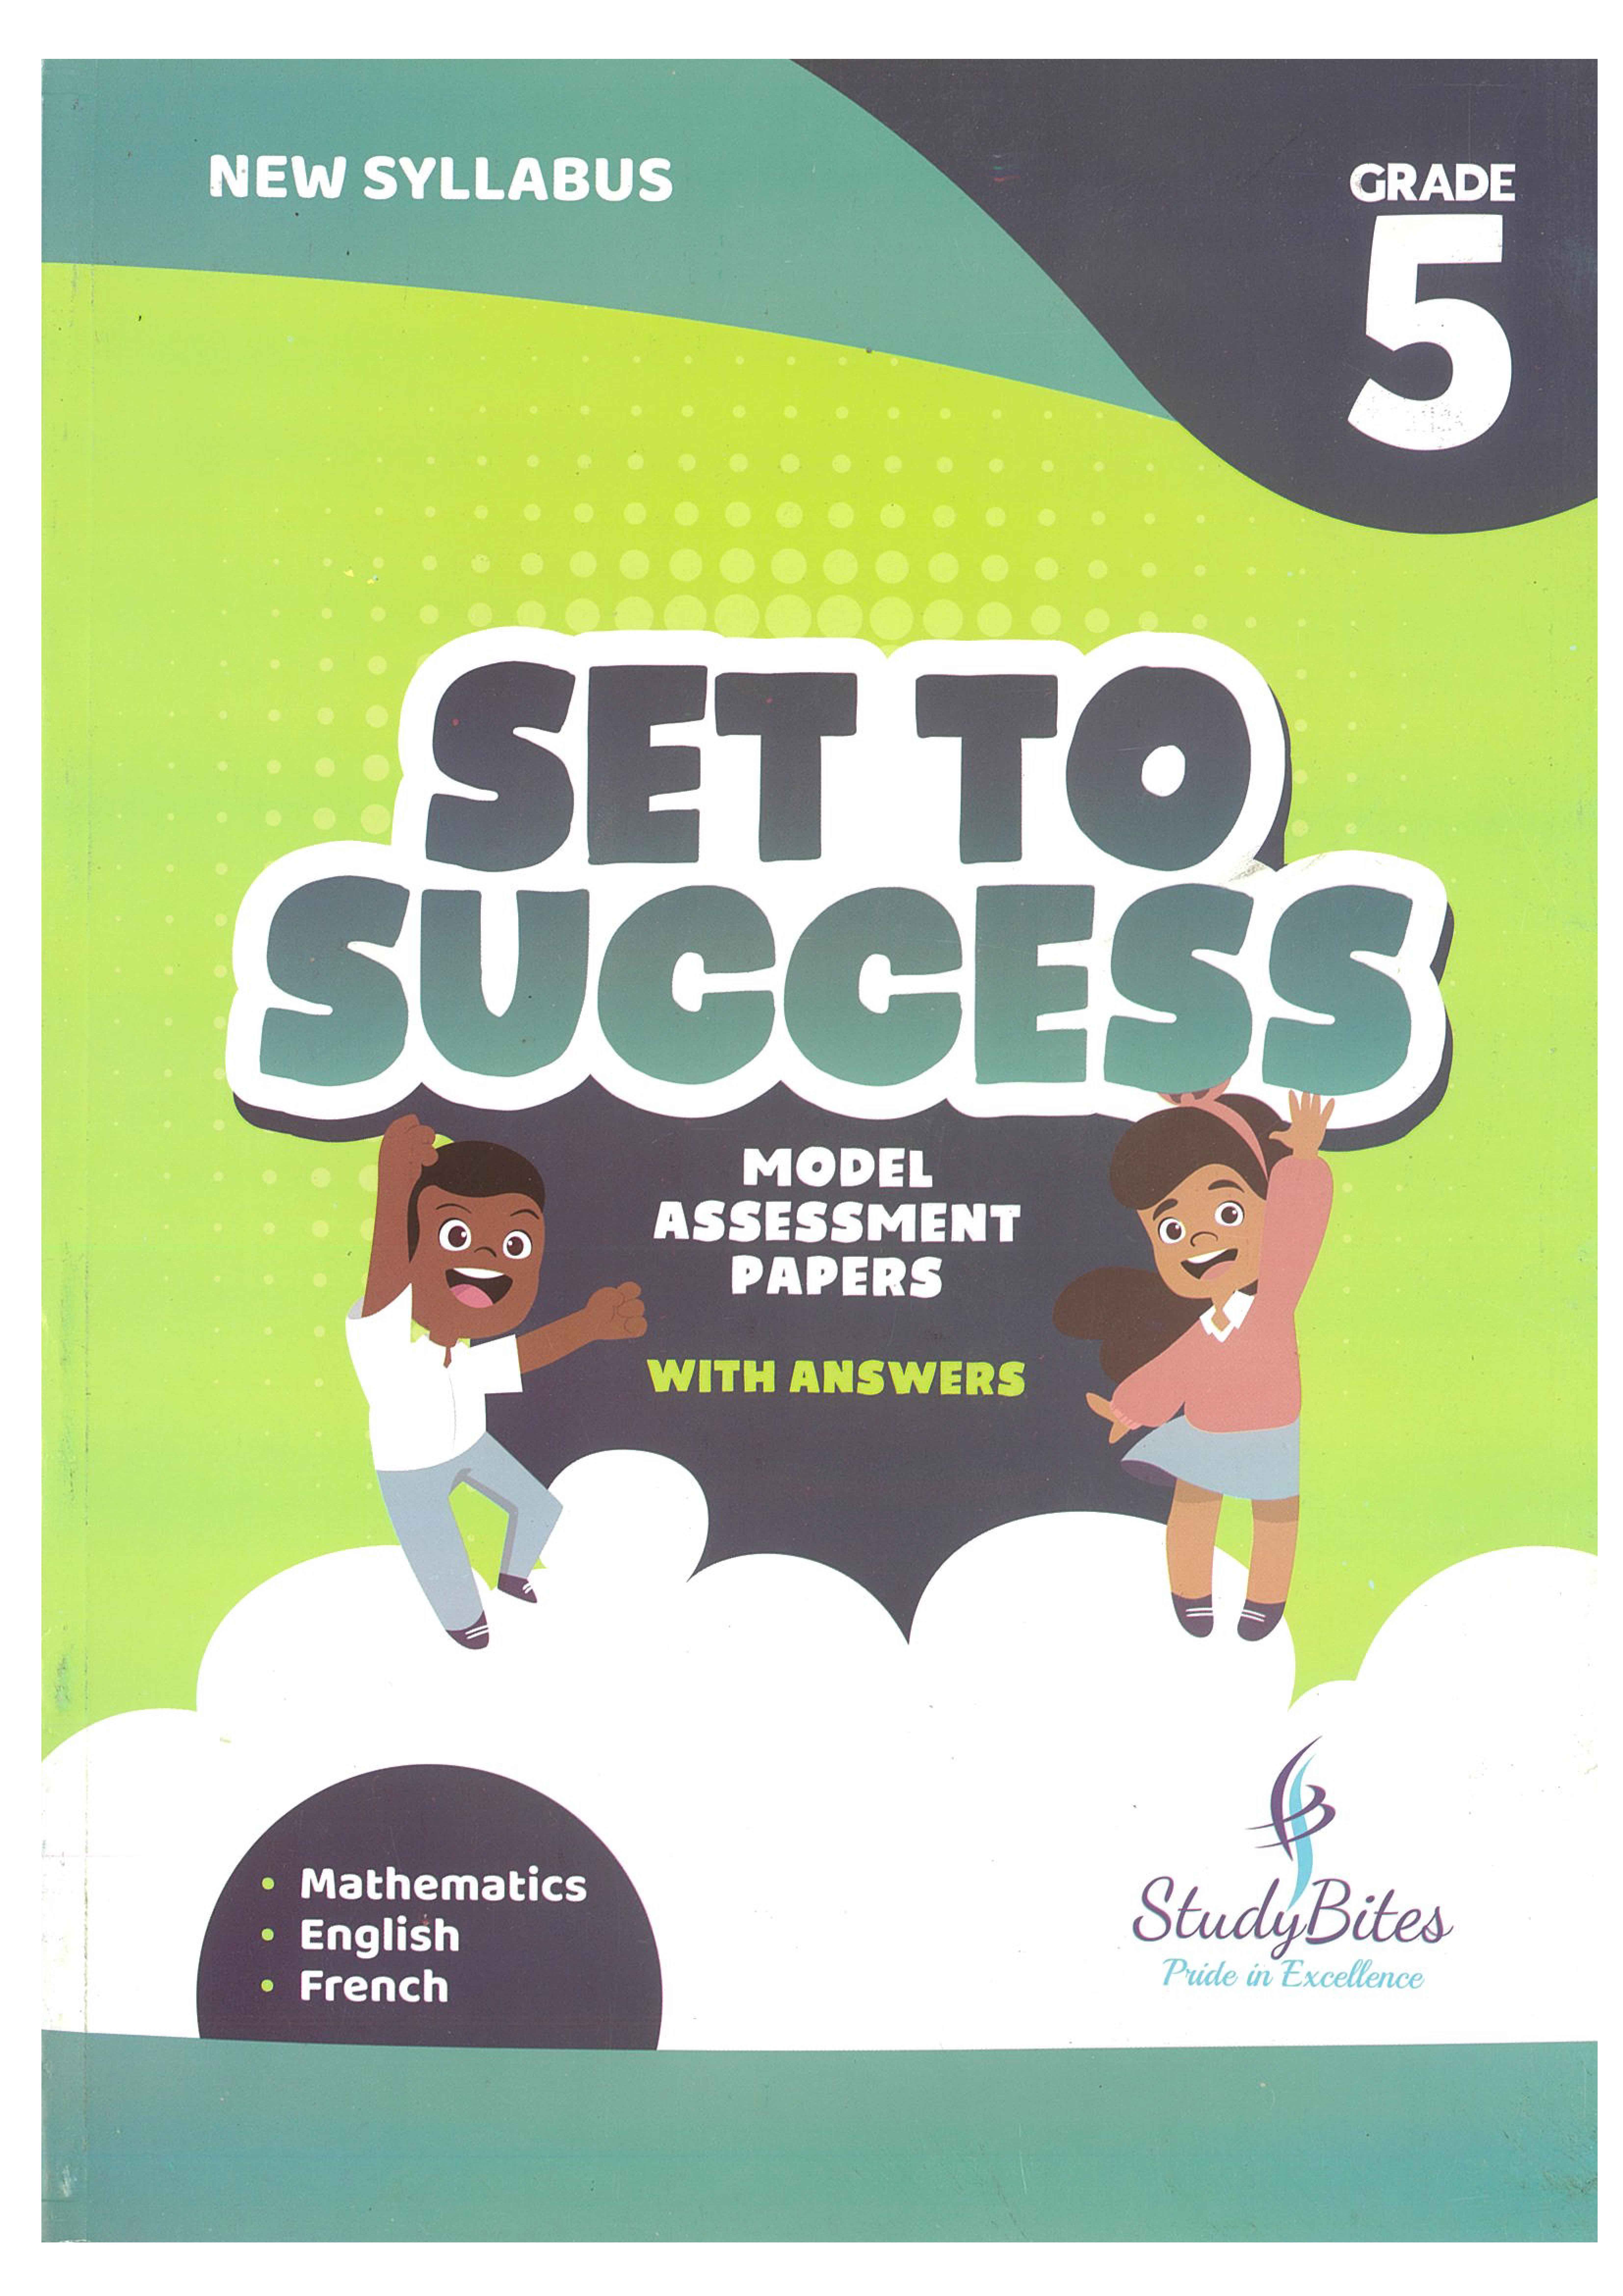 SET TO SUCCESS MODEL ASSESSMENT PAPERS GRADE 5